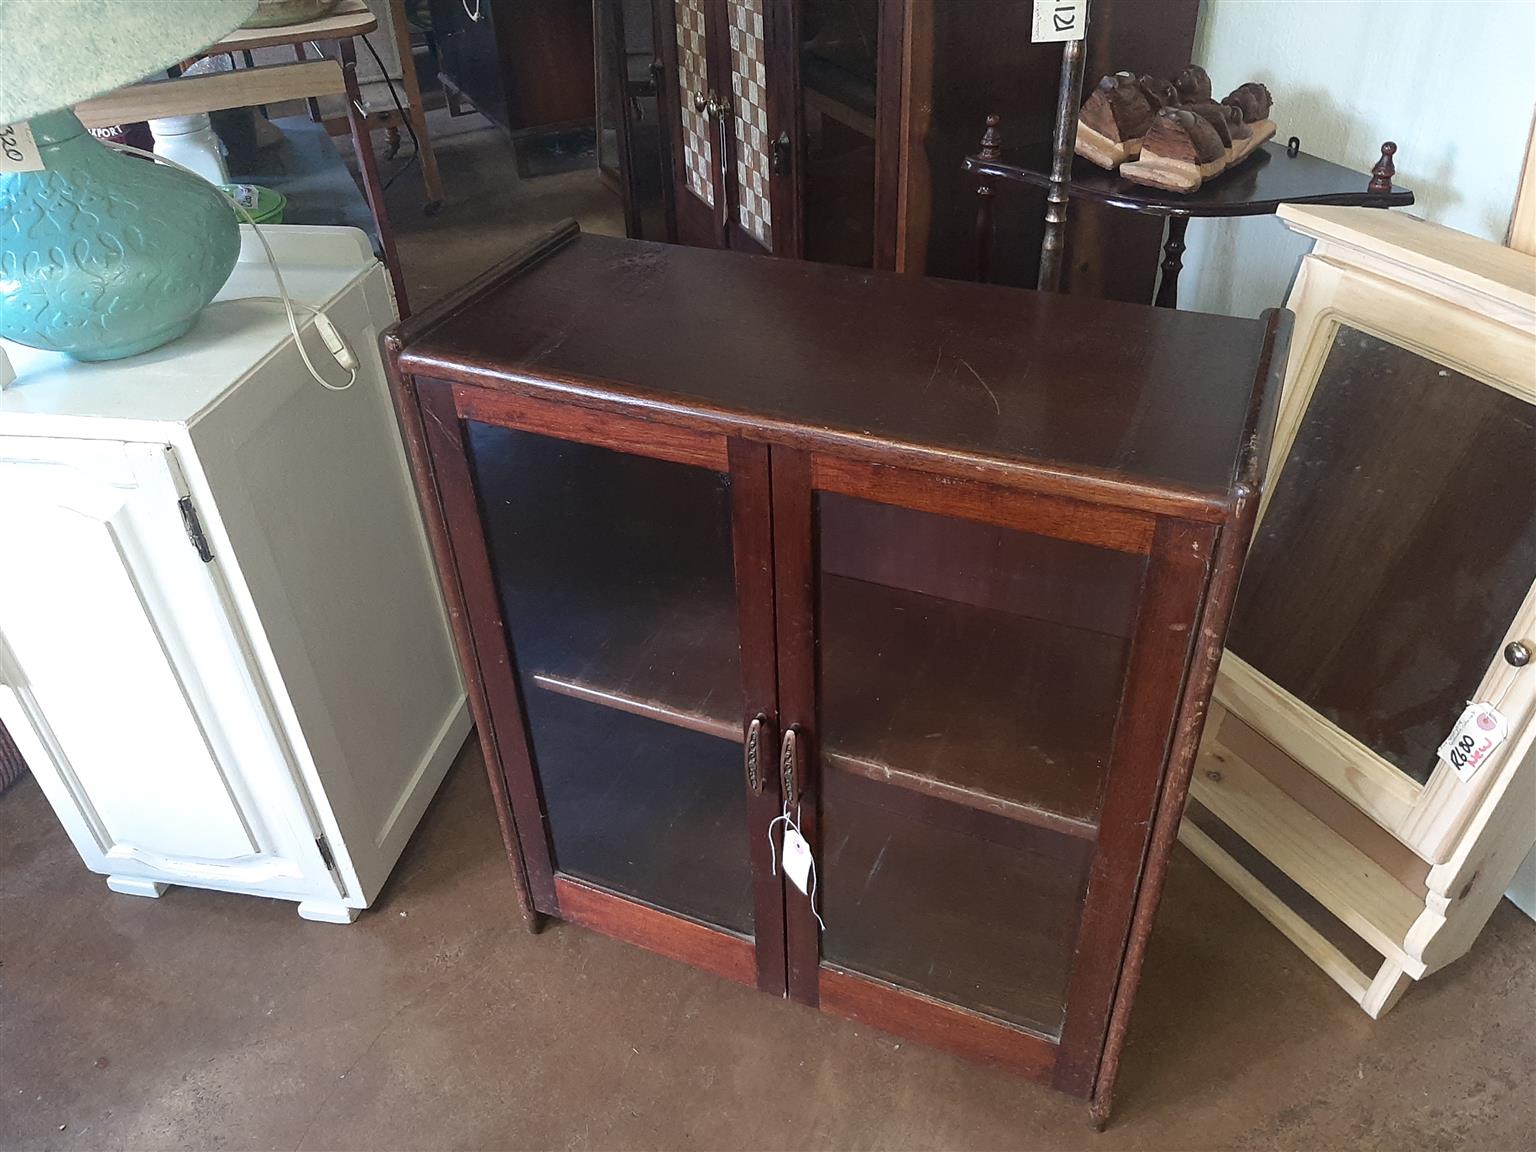 Small, glass-fronted bookcase or display cabinet